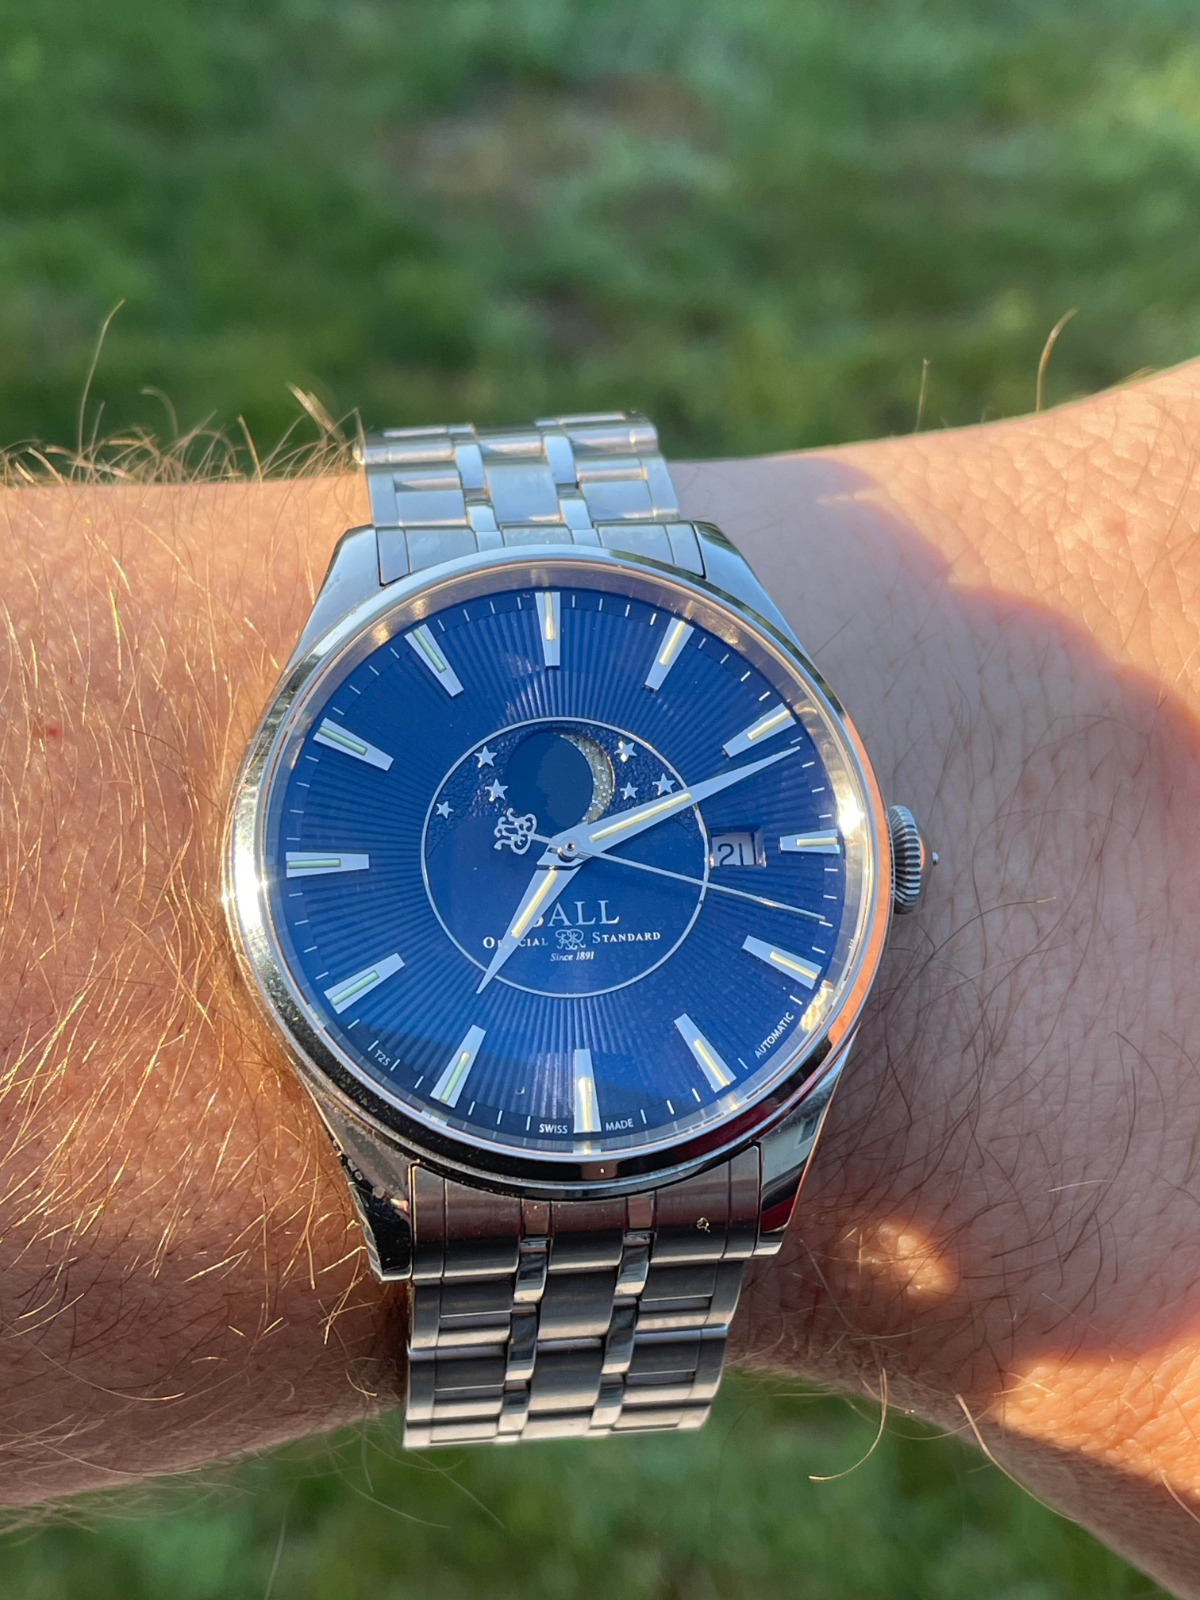 Ball Trainmaster Moon Phase Owner Review by @nubenuberson